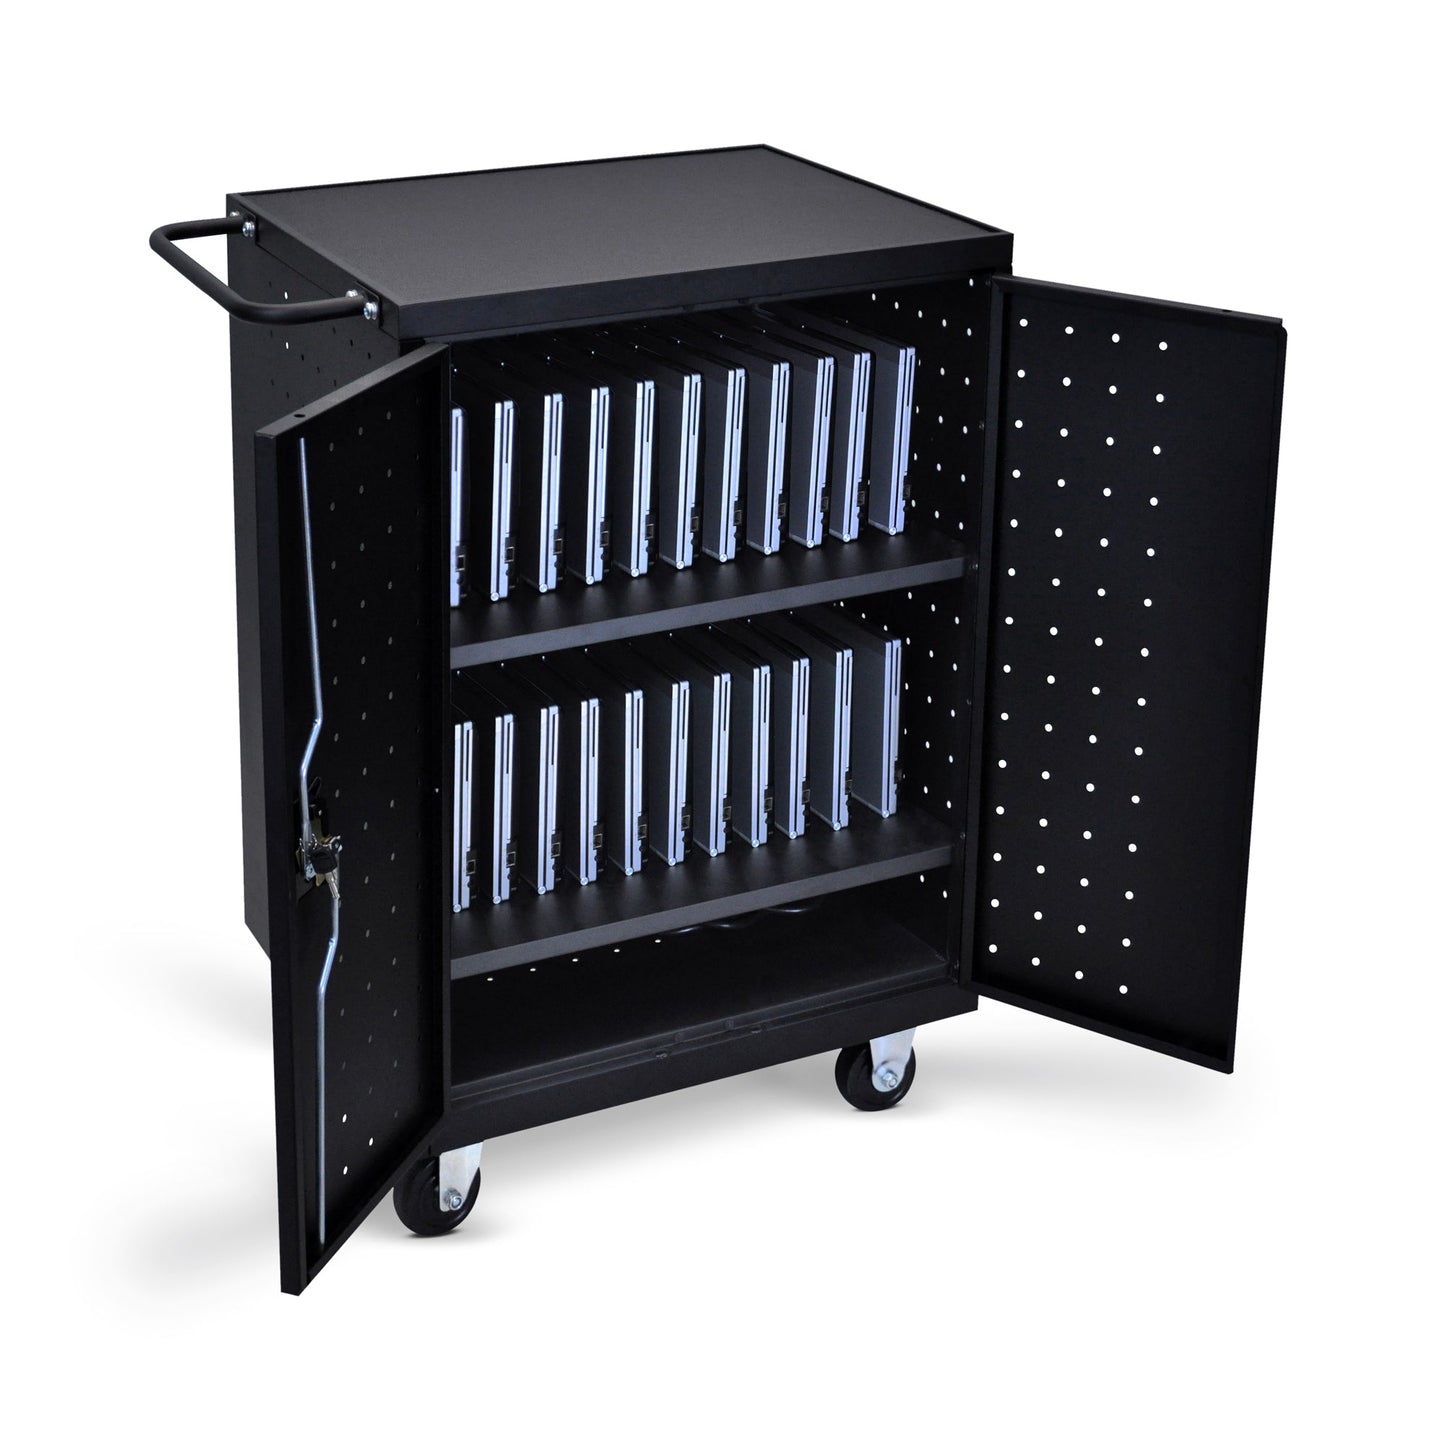 24-Bay Charging Cart, Black for Chromebook, Tablets, IPads, Laptops by Luxor (Luxor LUX-LLTP24-B) - SchoolOutlet